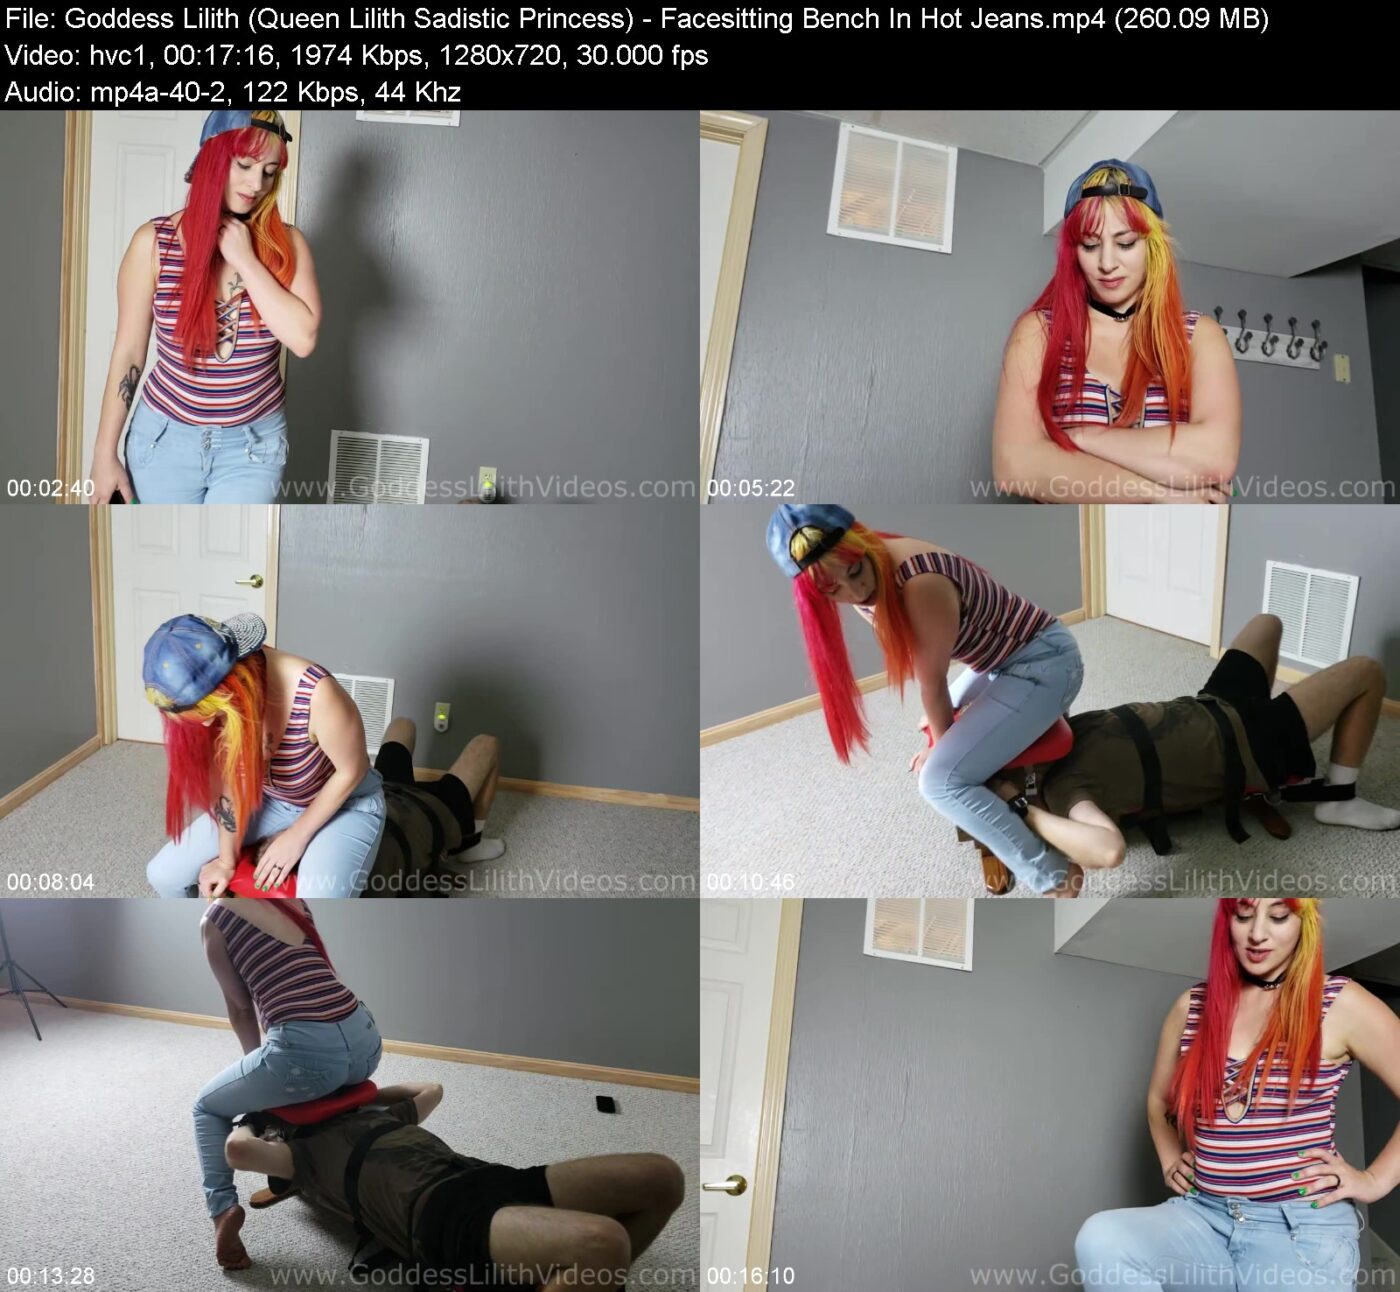 Actress: Goddess Lilith (Queen Lilith Sadistic Princess). Title and Studio: Facesitting Bench In Hot Jeans